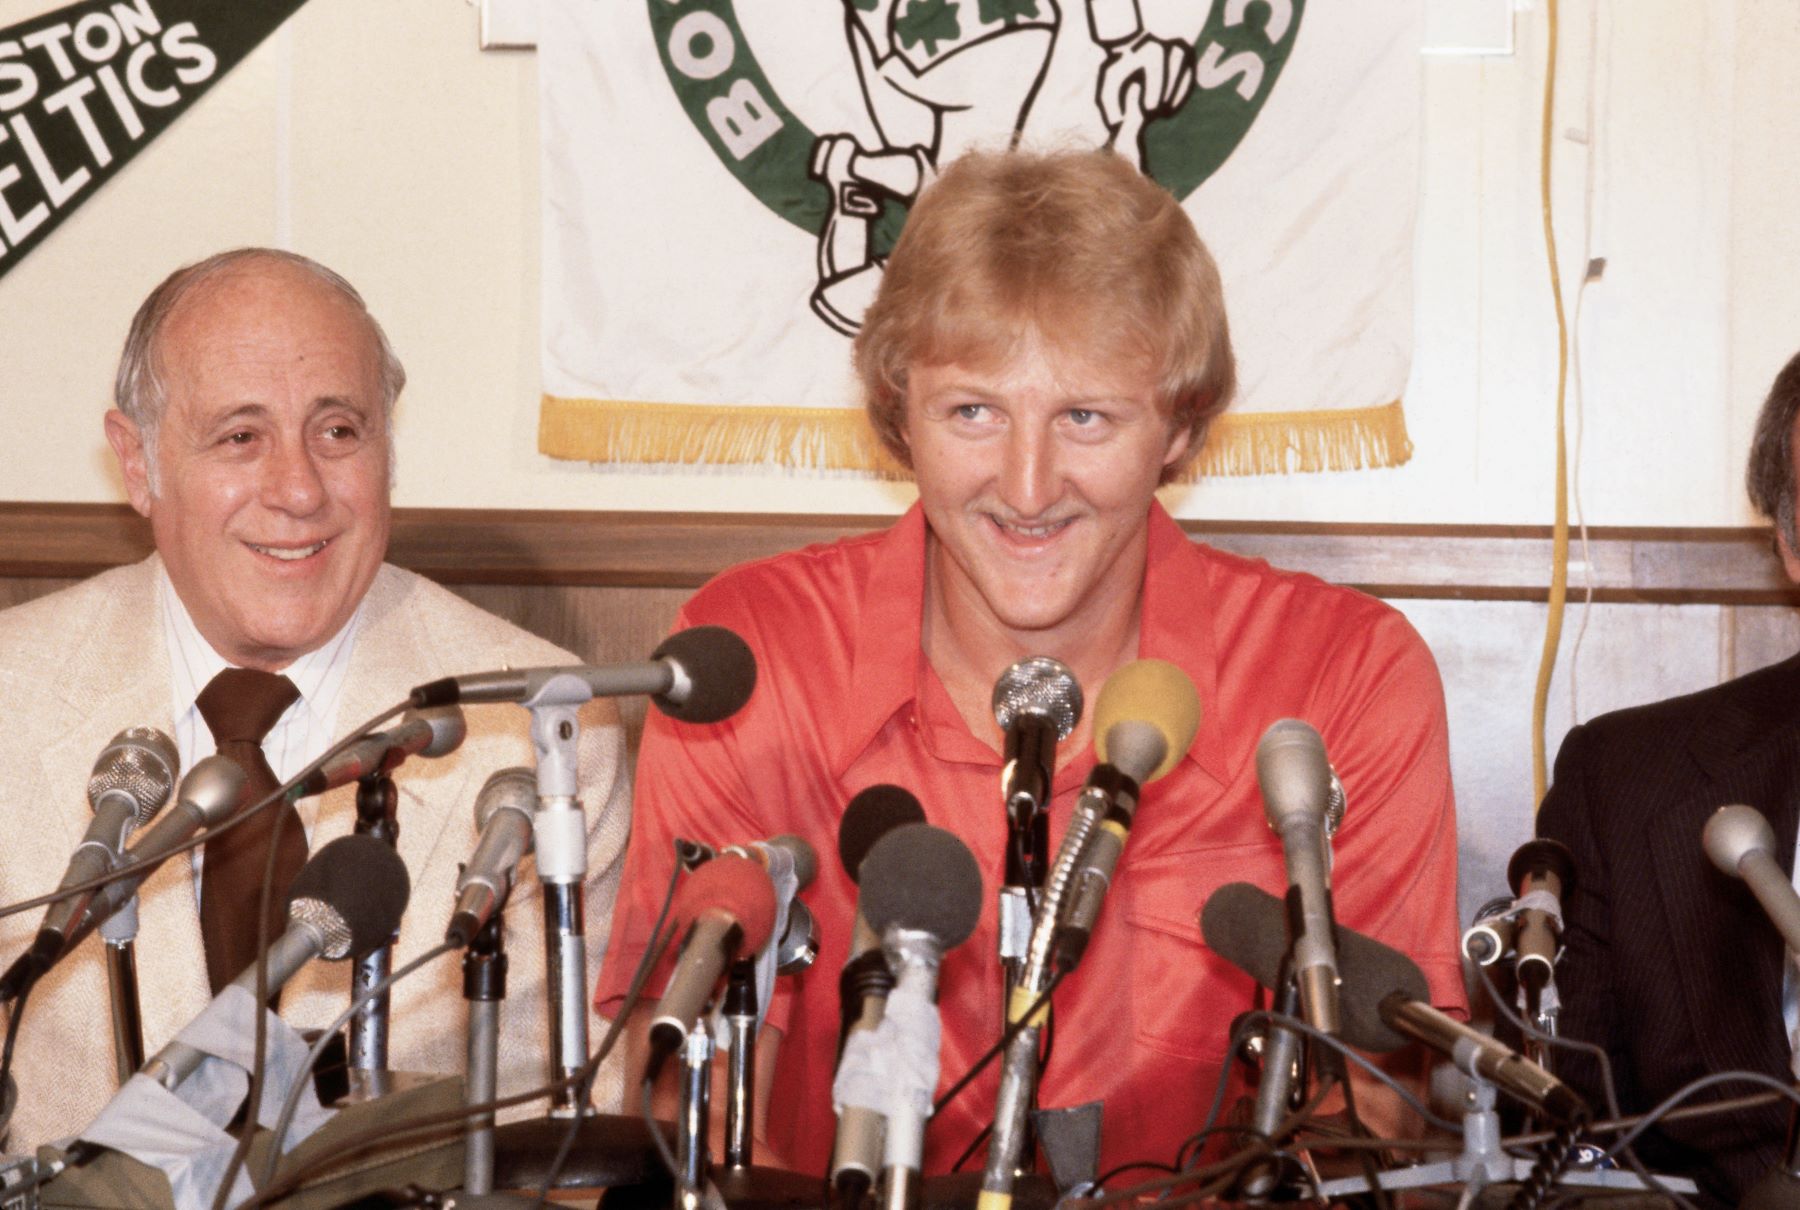 College basketball player Larry Bird of Indiana State attending a press conference after being signed to the Boston Celtics